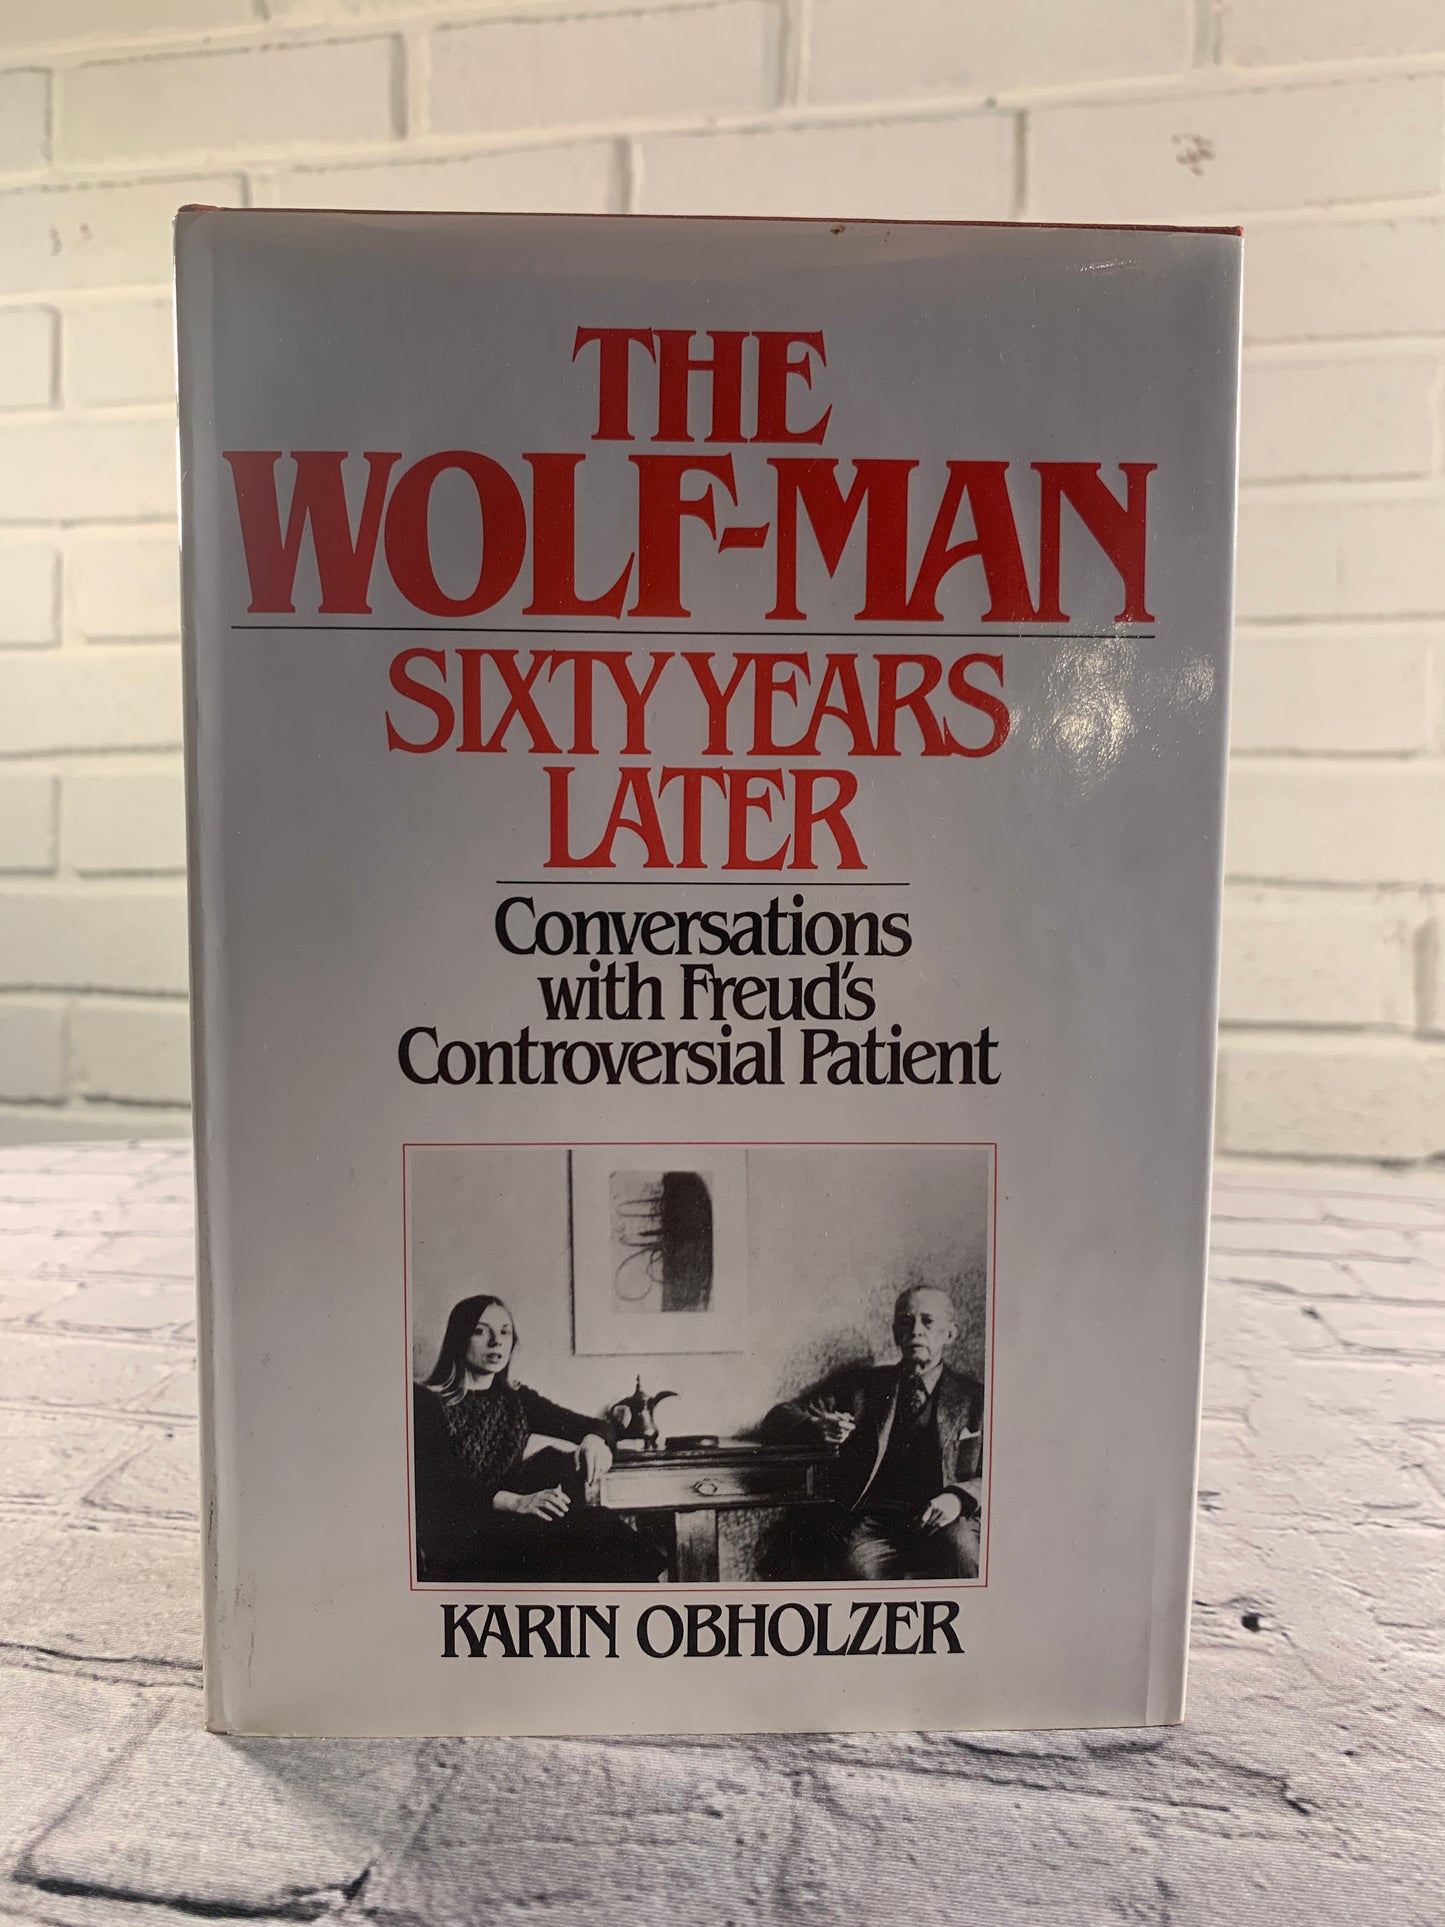 The Wolf-Man: Sixty Years Later - Freud's Patient by Obholzer [1982]